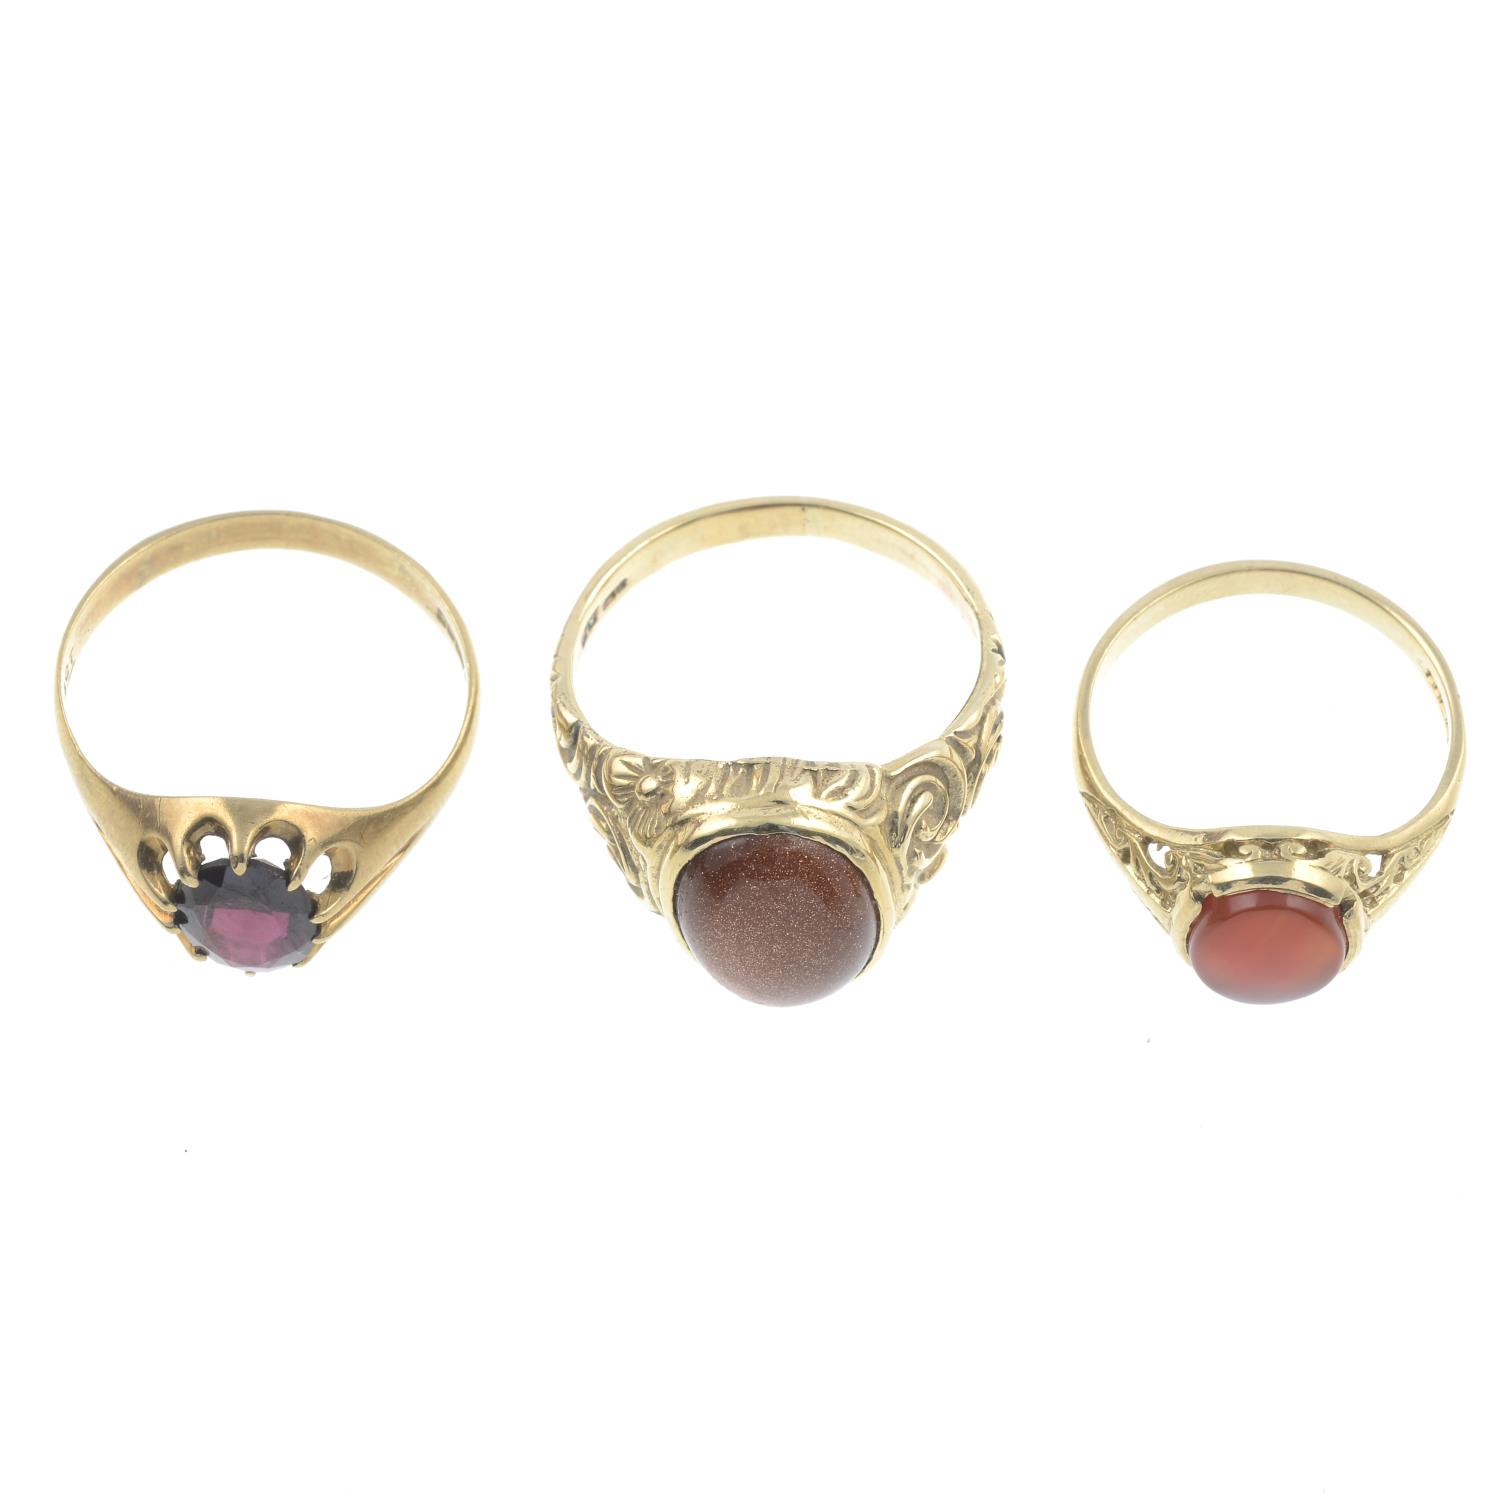 9ct gold carnelian signet ring, hallmarks for 9ct gold, ring size P, 2.9gms. - Image 2 of 2